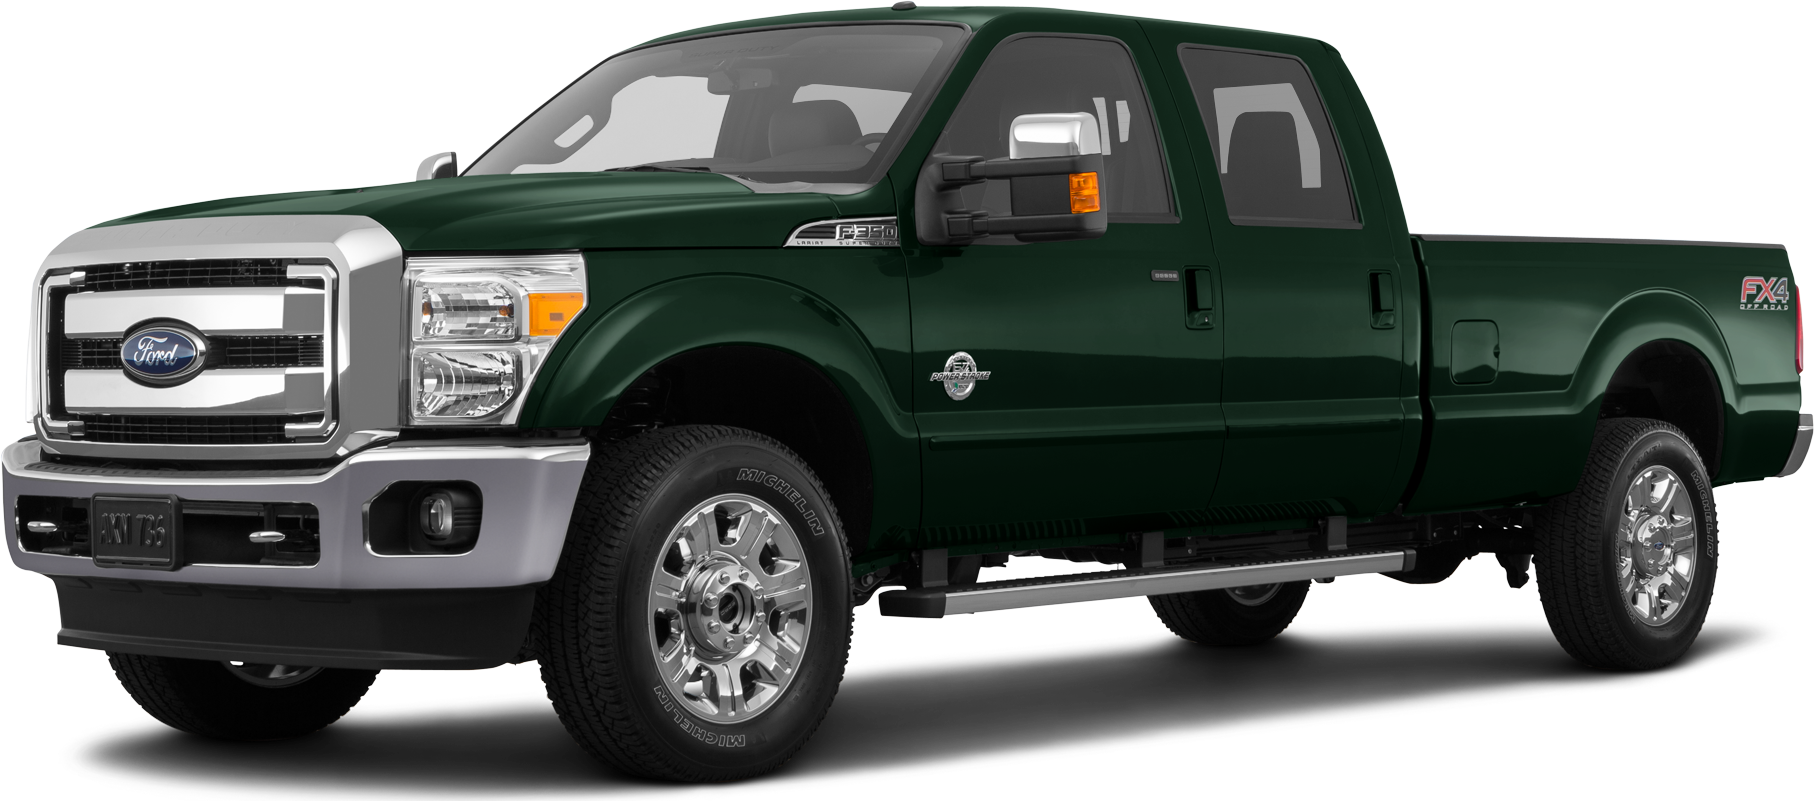 2016 Ford F350 Super Duty Crew Cab Specs and Features | Kelley